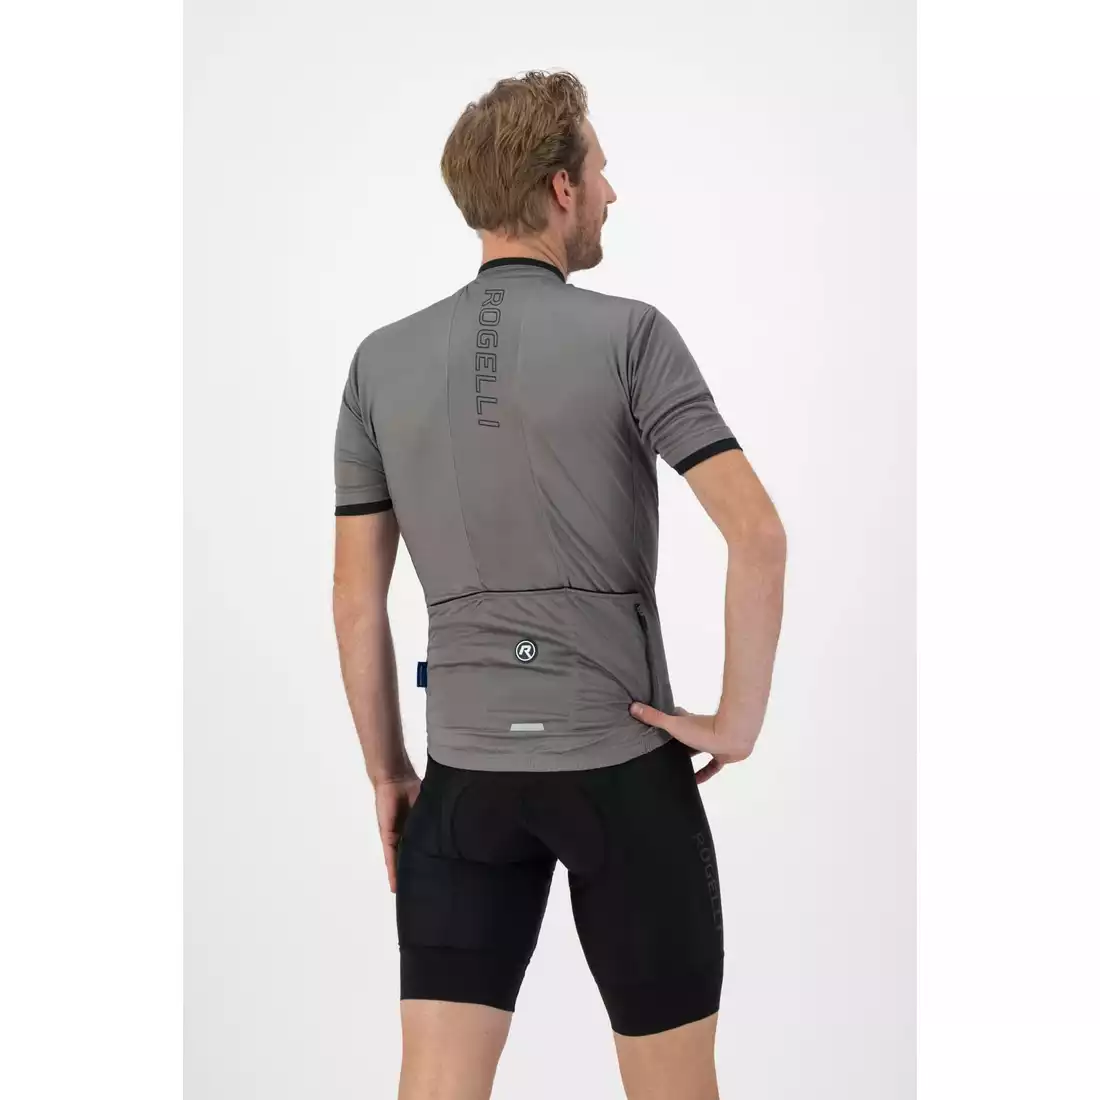 Rogelli ESSENTIAL men's cycling jersey, graphite